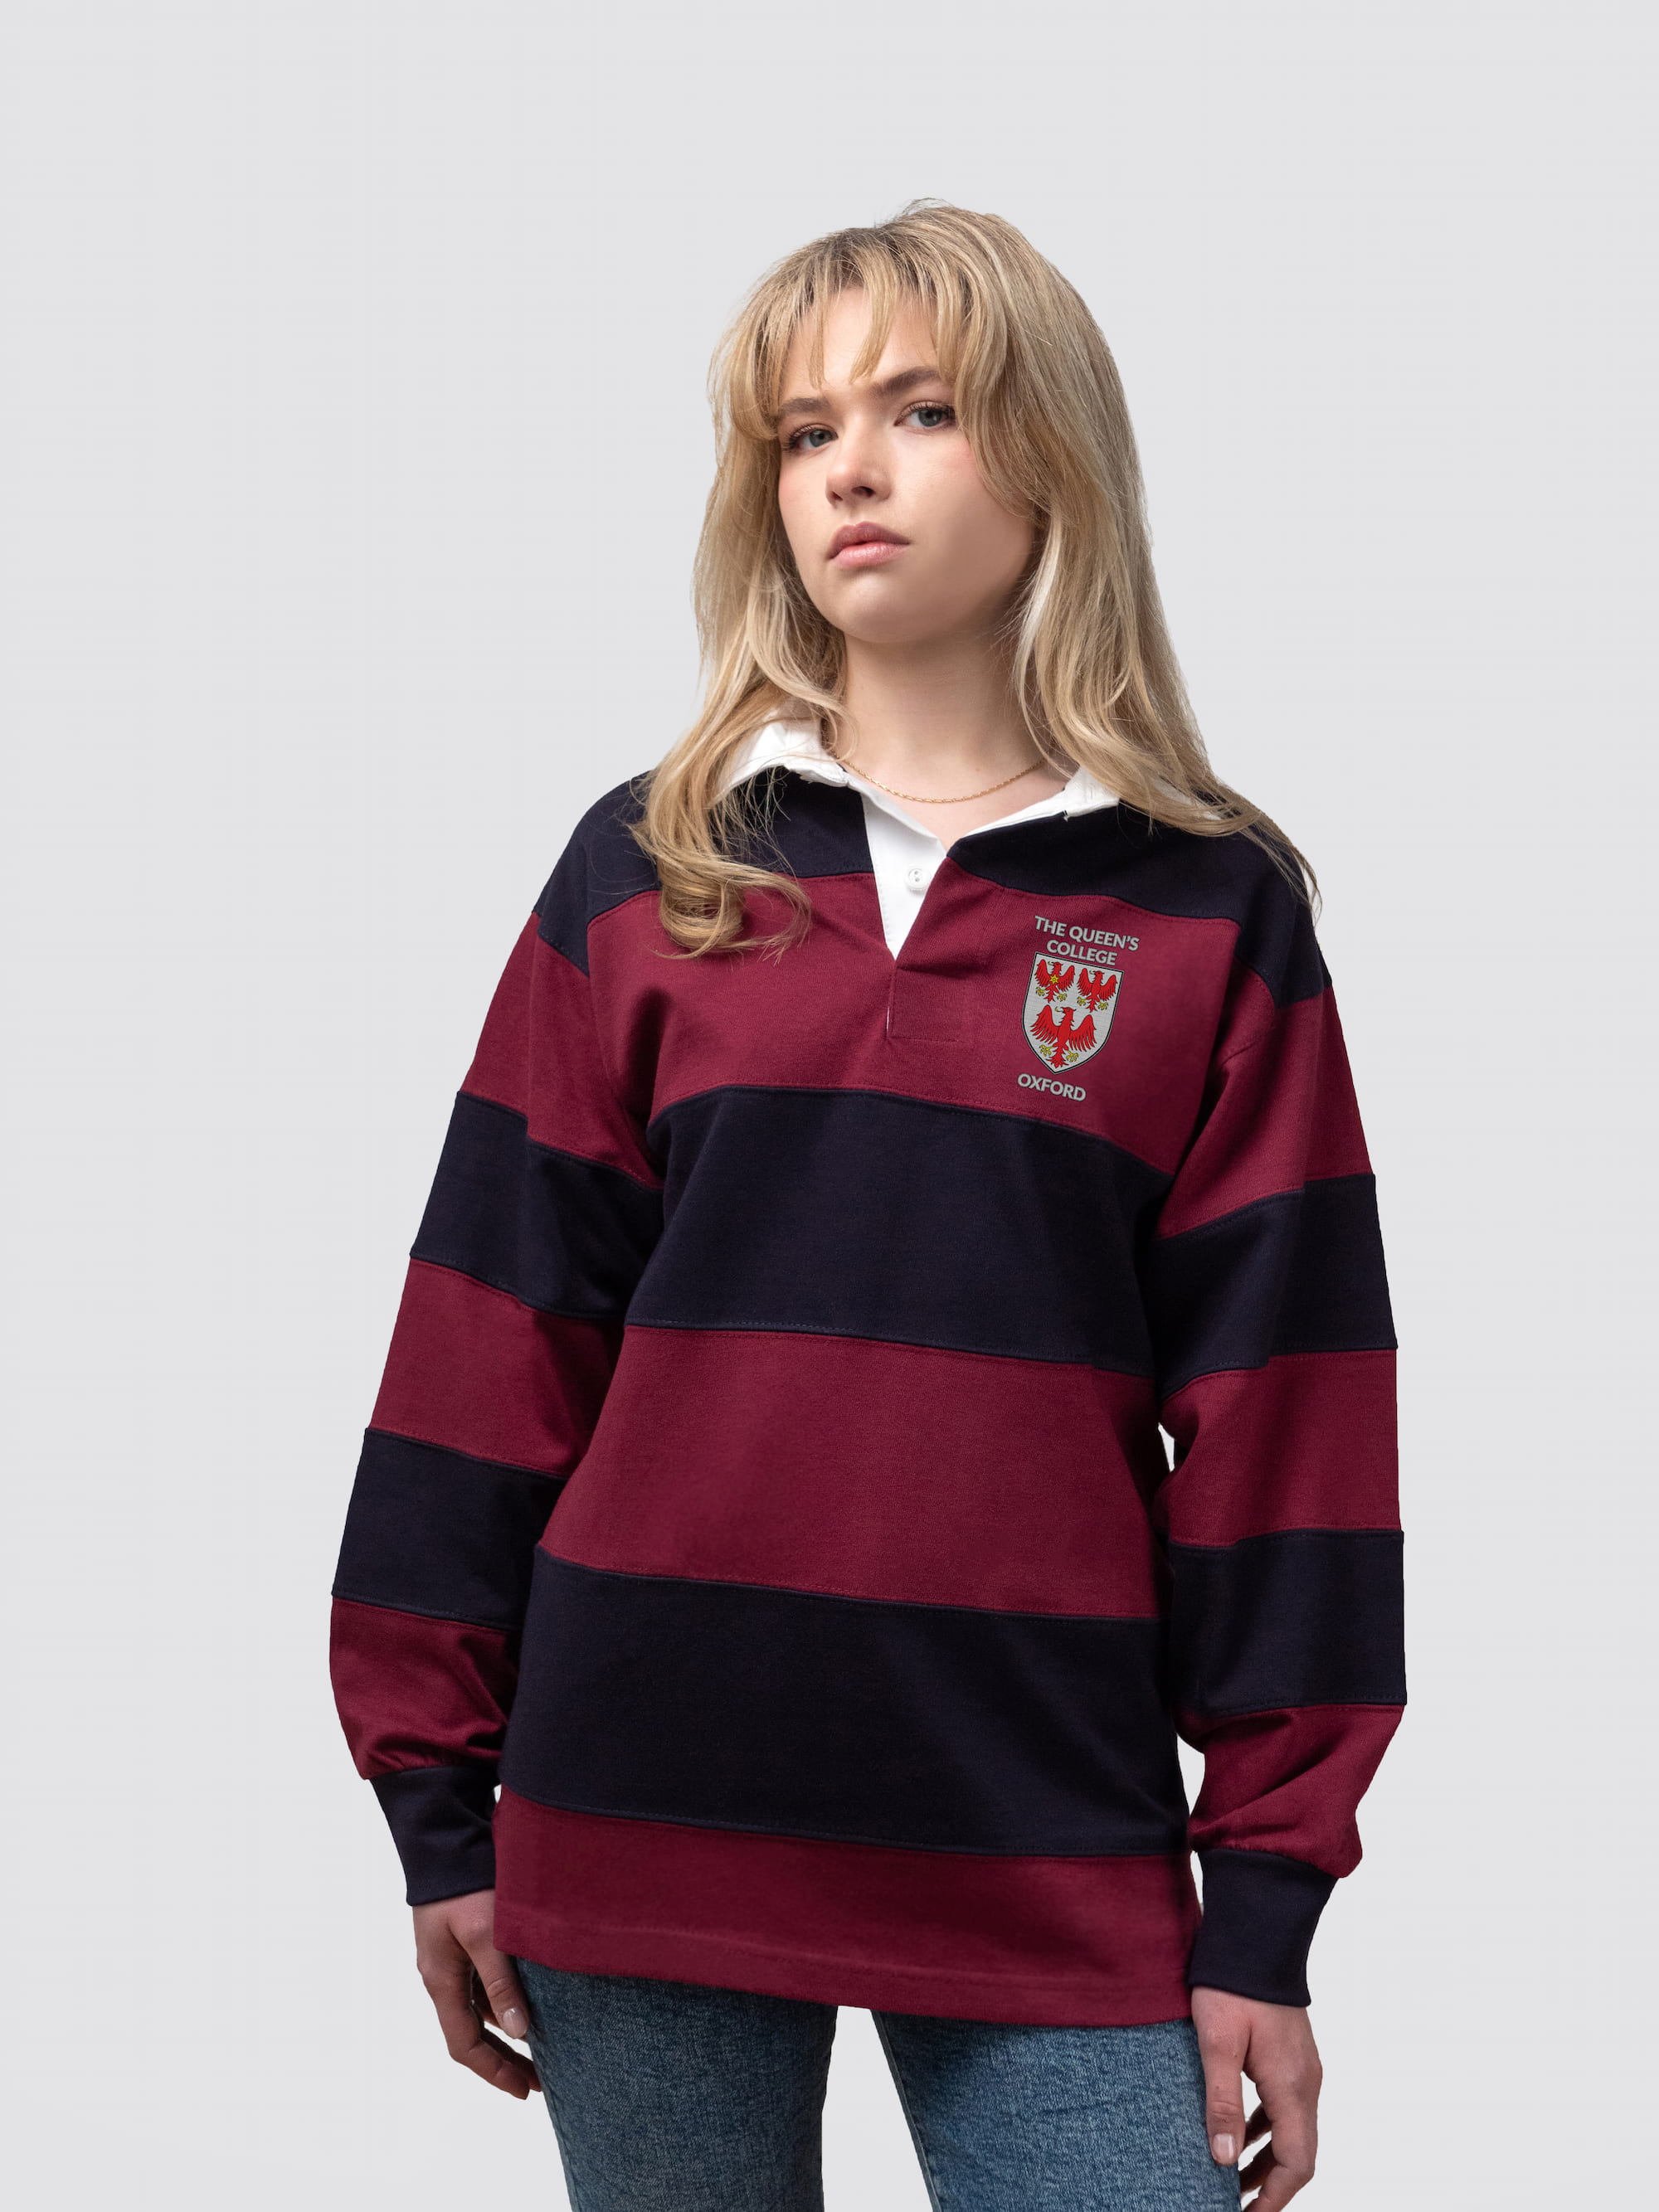 The Queen's College rugby shirt, with burgundy and navy stripes